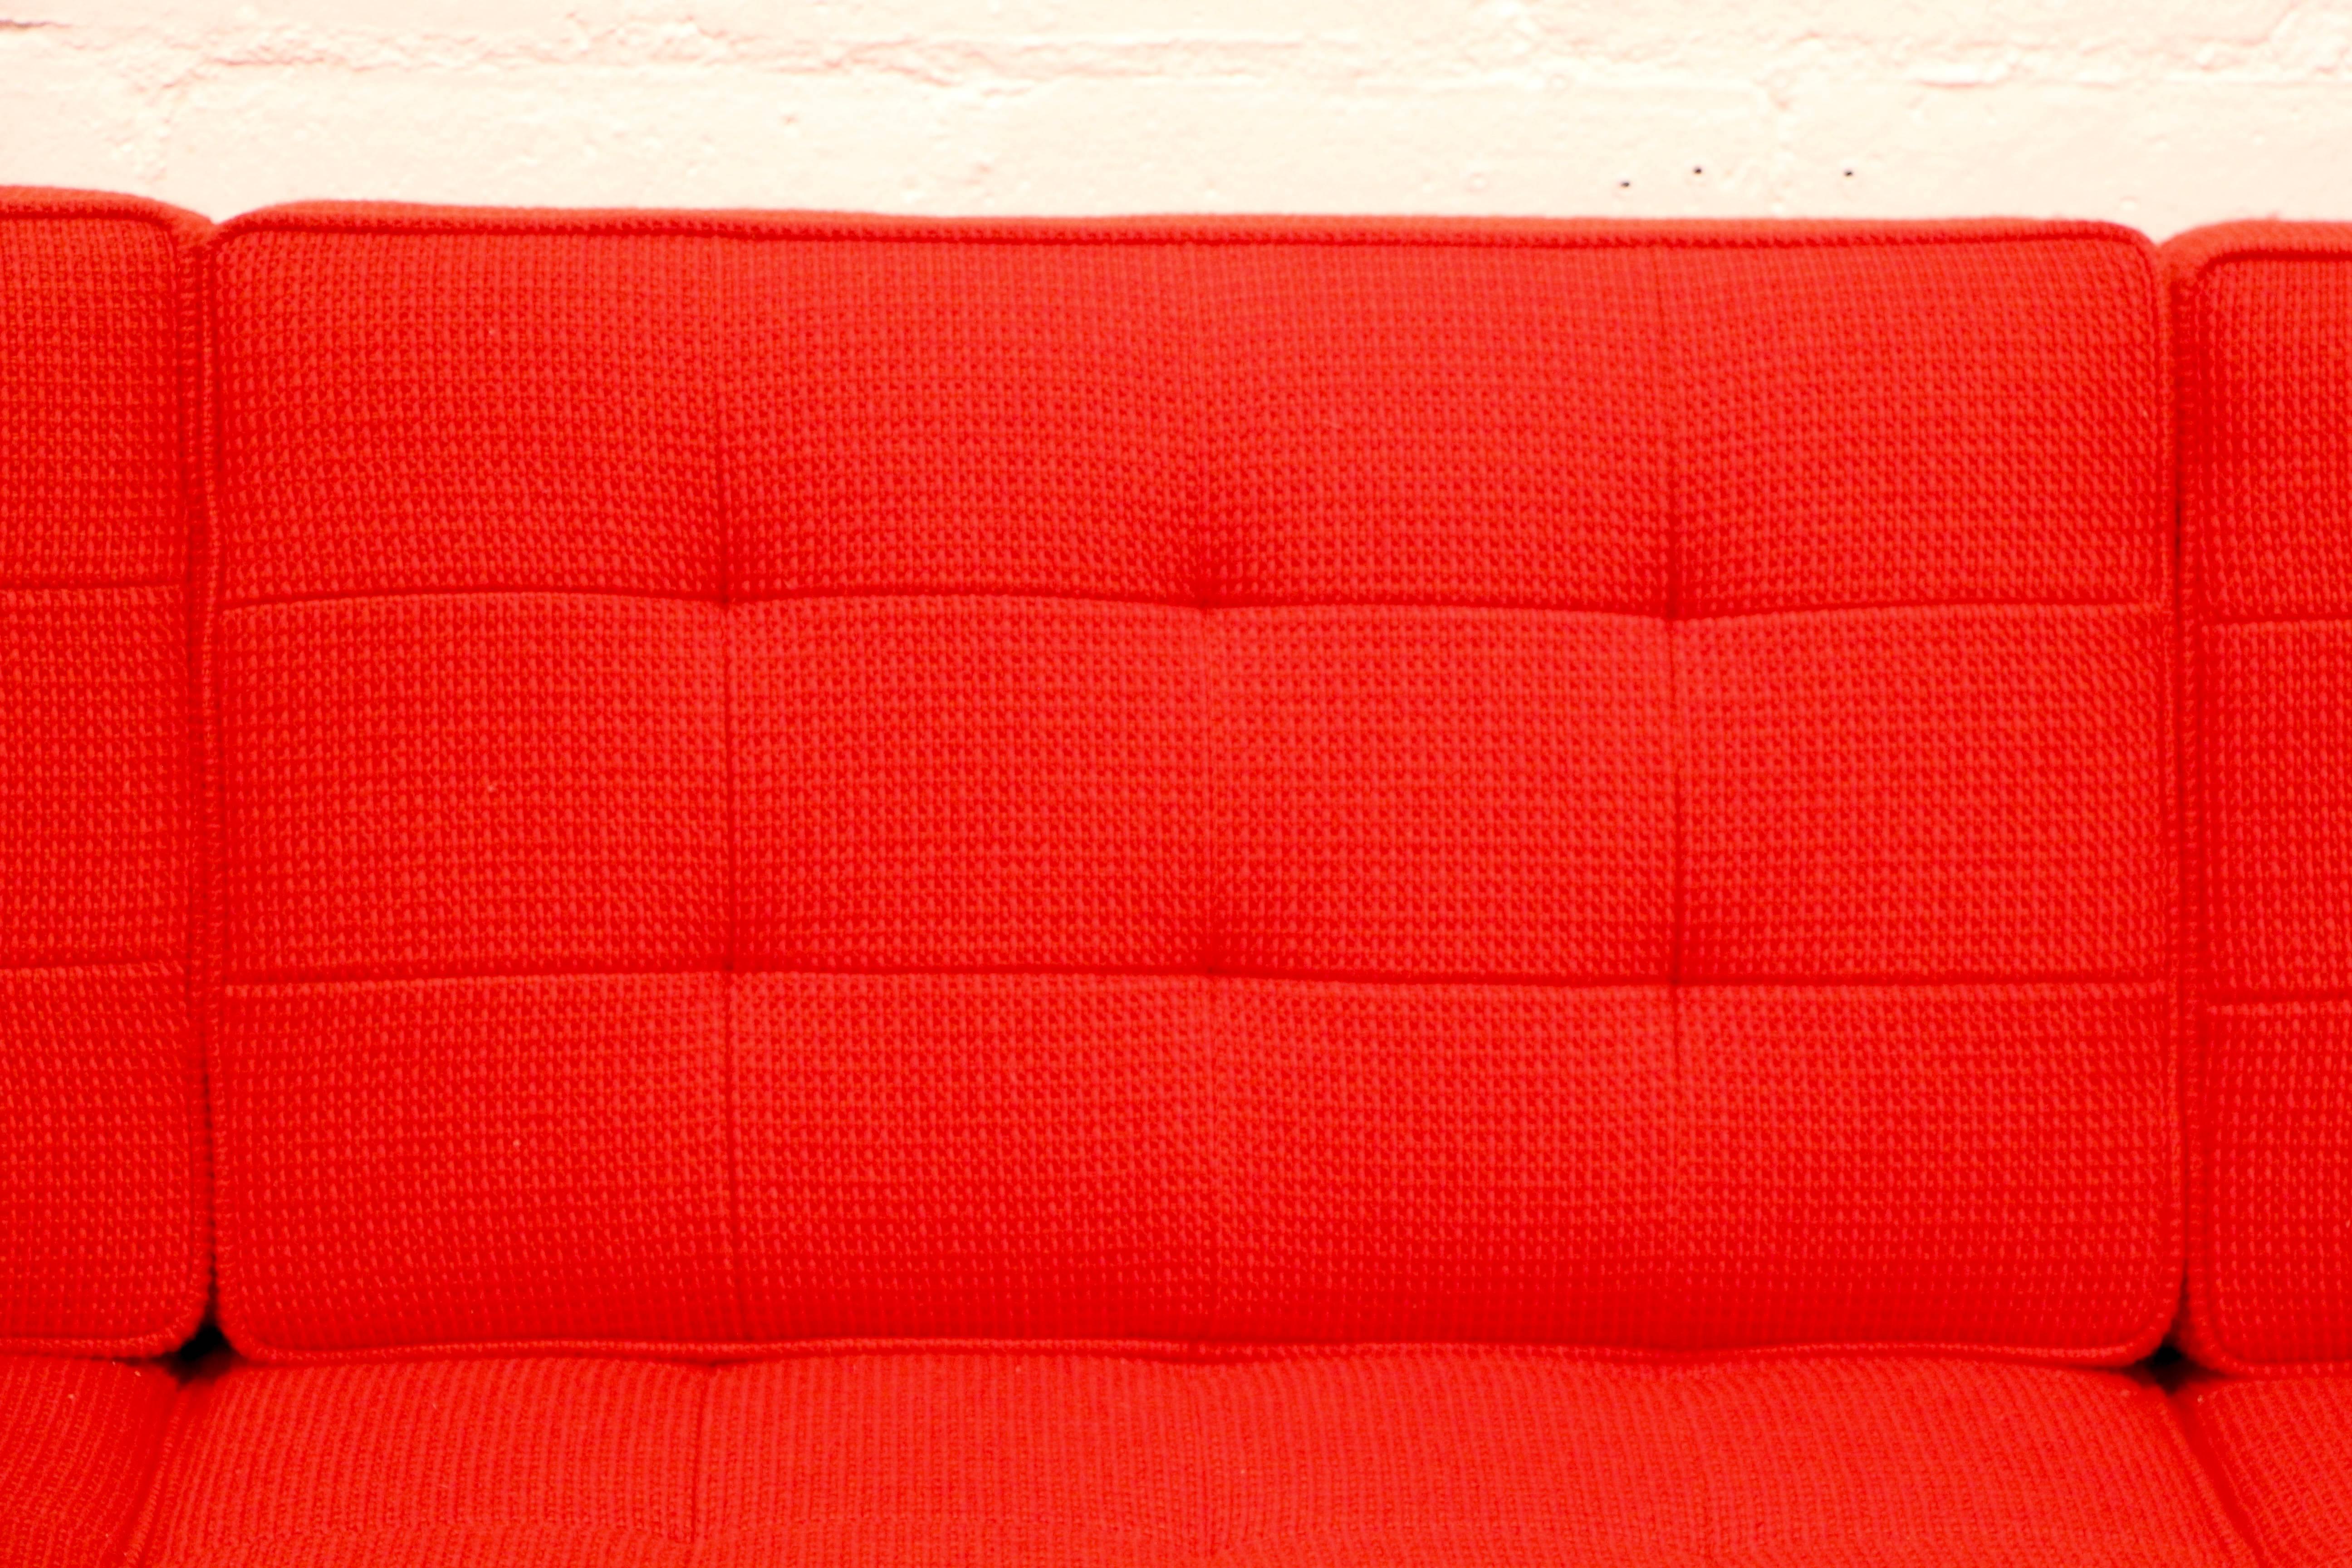 A nice of Florence Knoll sofa in Cato fire red fabric. They bear a tag that dates them to 2014. They were designed originally designed in 1954. The sofa has a little wear, showing some use. Marked on the leg as well Florence Knoll, Knoll Studios on